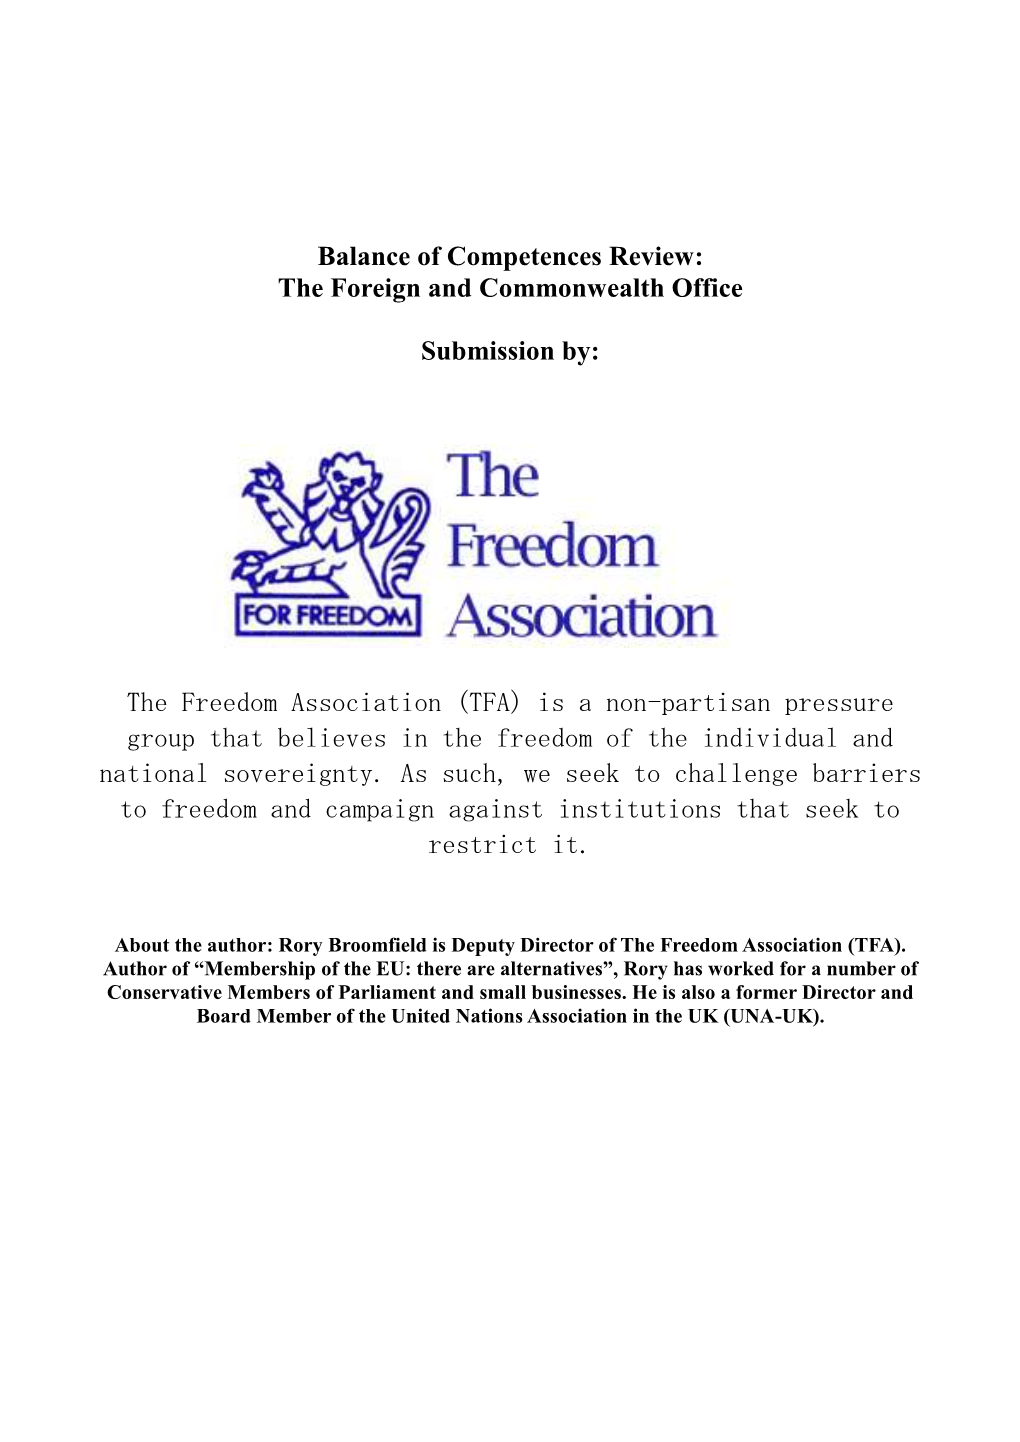 Balance of Competences Review: the Foreign and Commonwealth Office